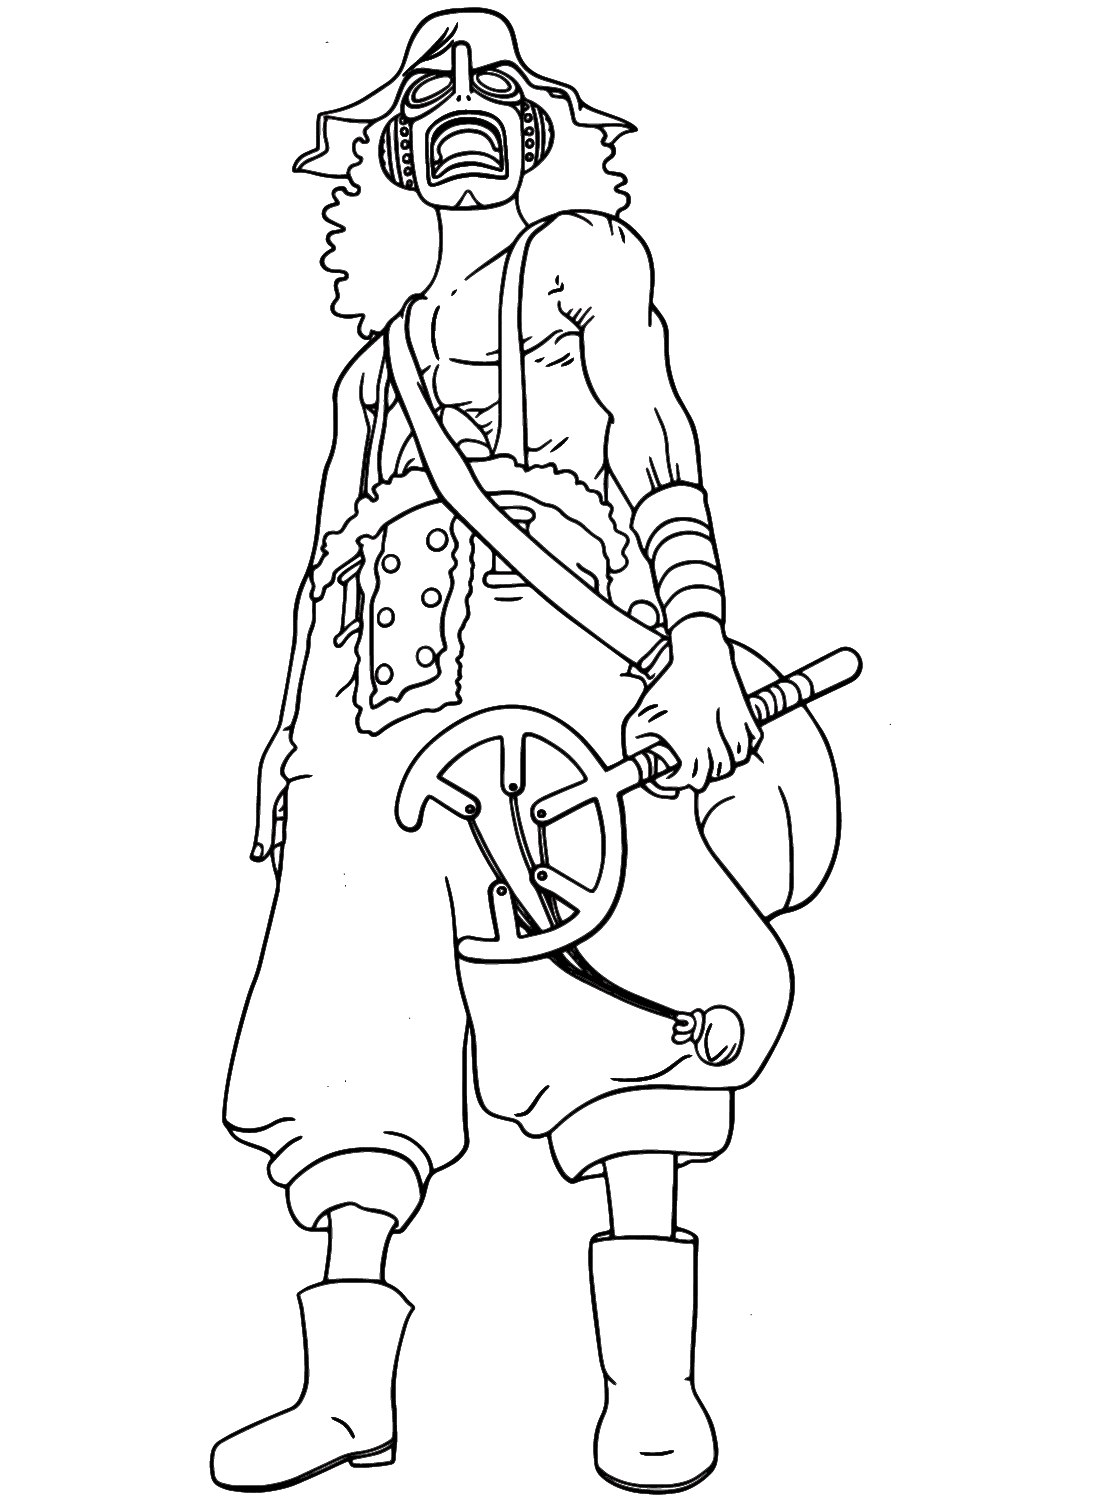 Usopp, Pirate from One Piece Coloring Page - Free Printable Coloring Pages